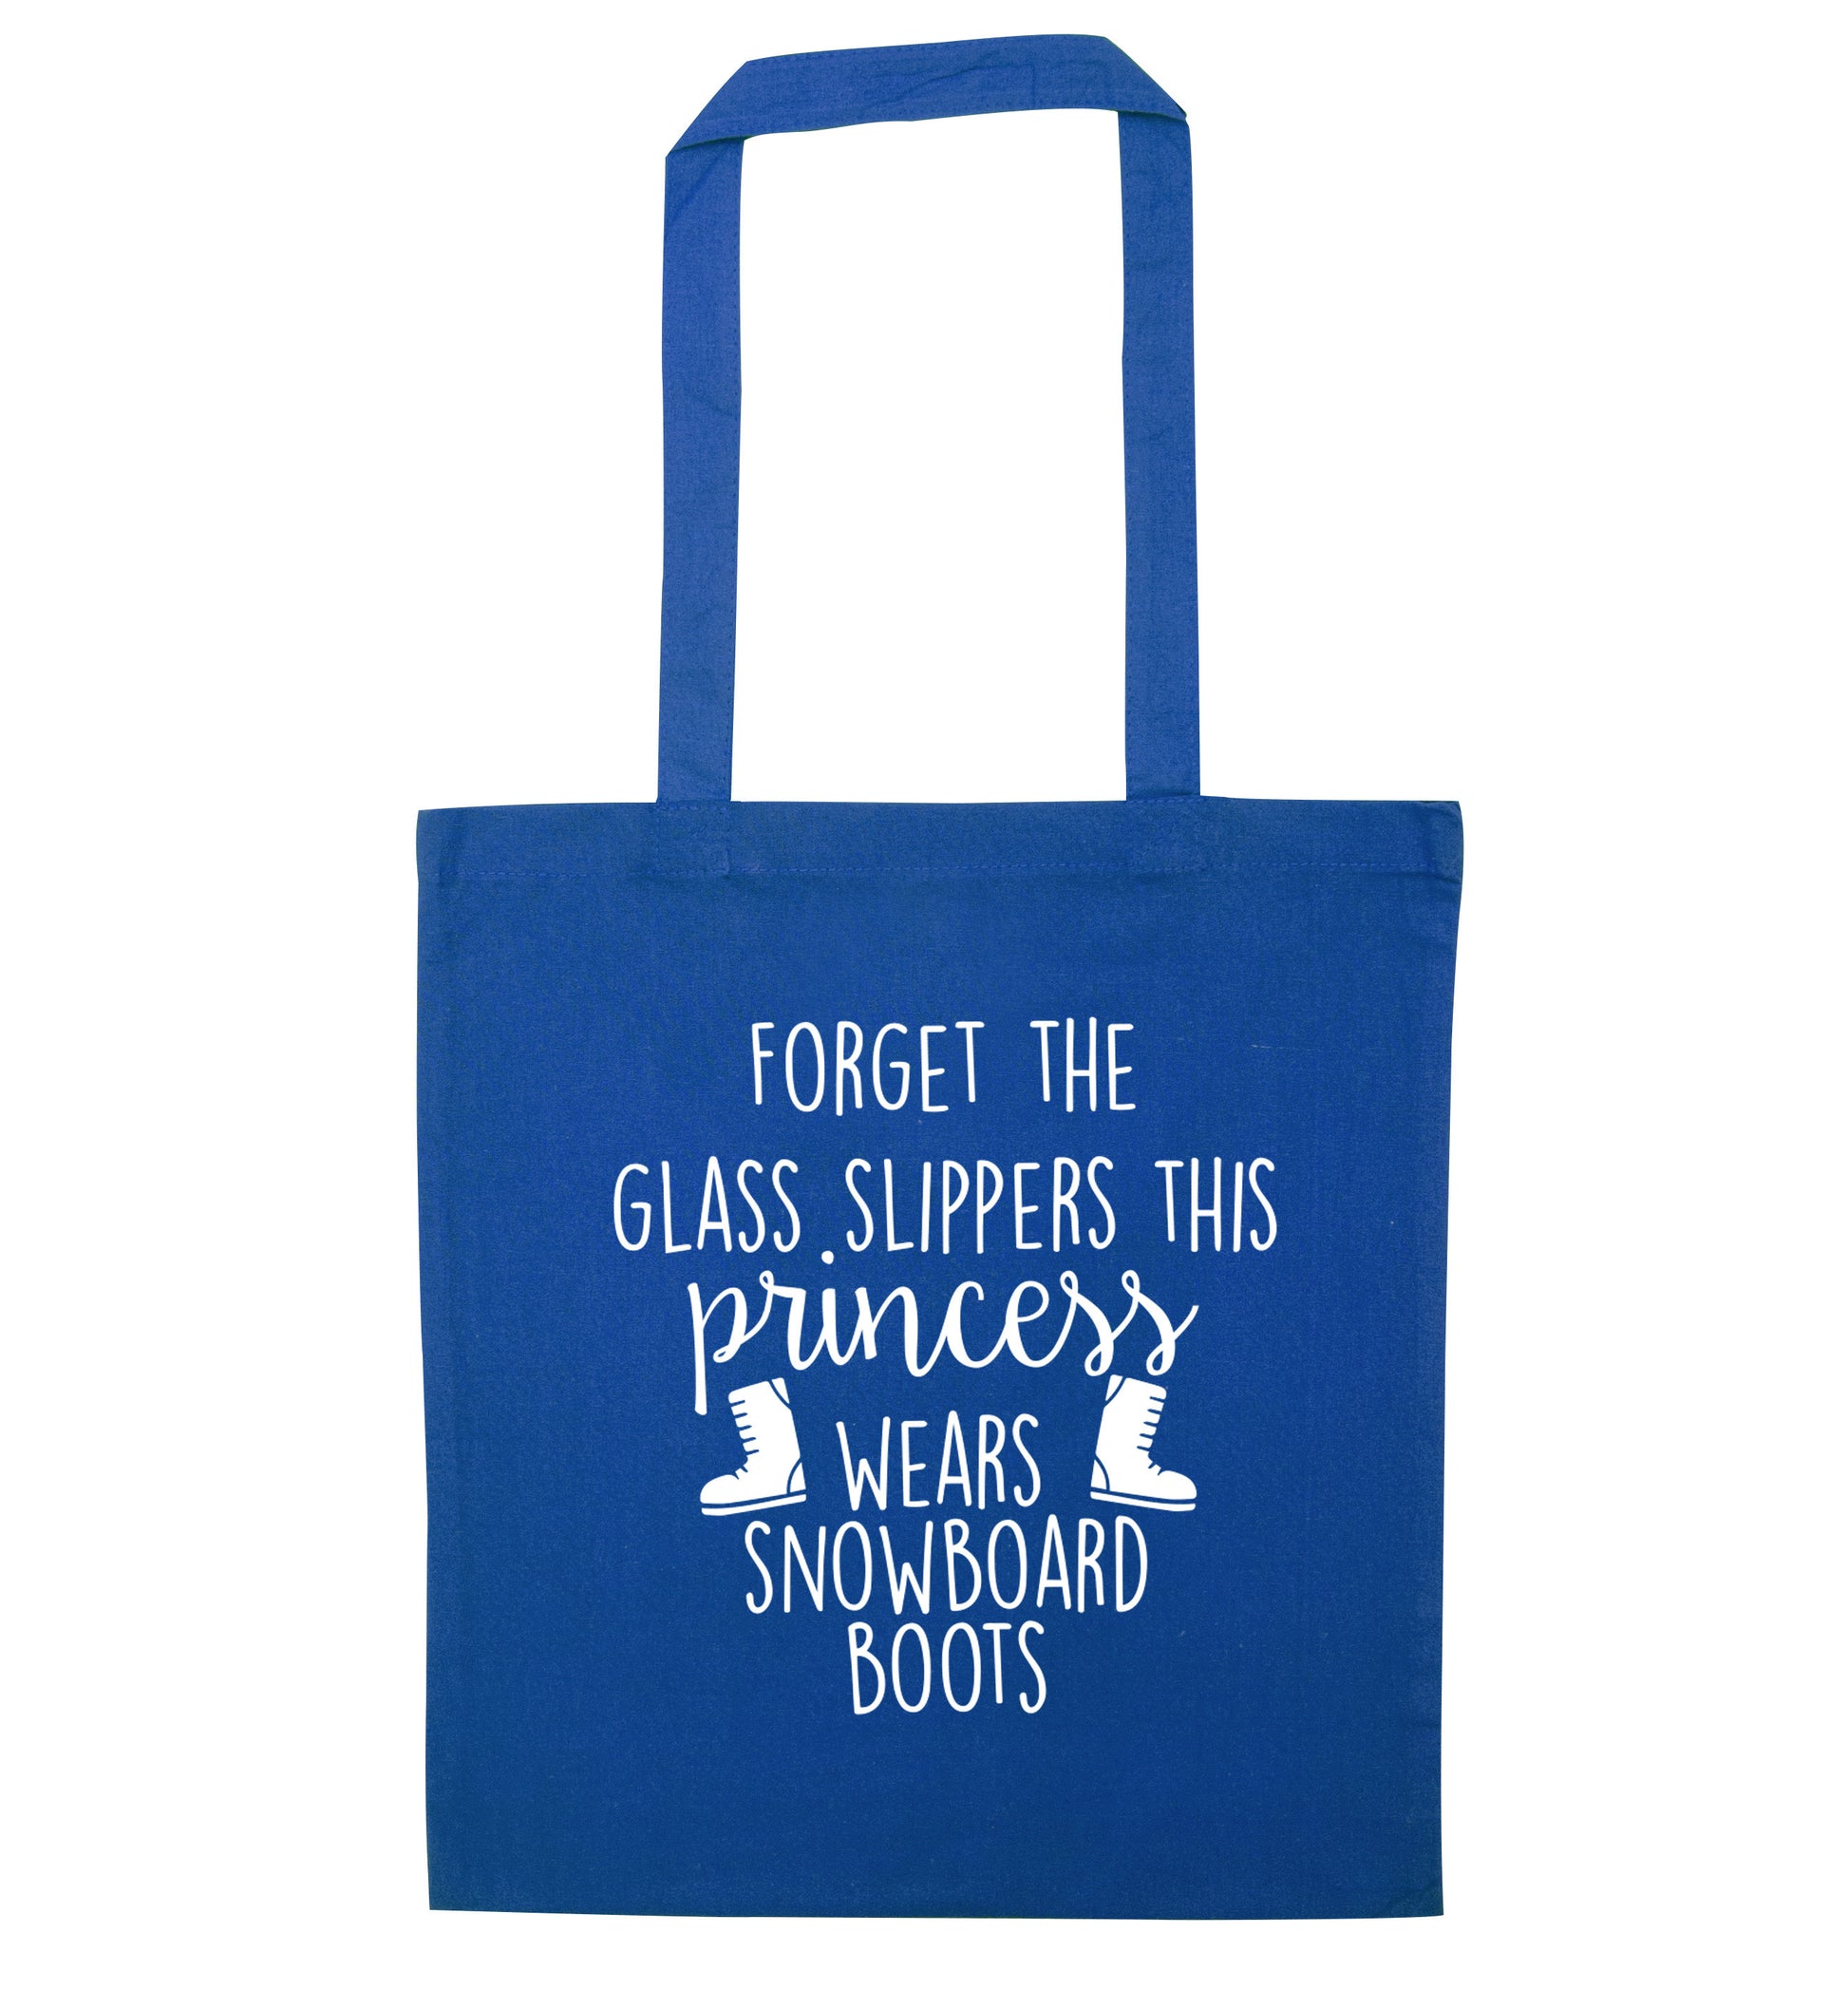 Forget the glass slippers this princess wears snowboard boots blue tote bag